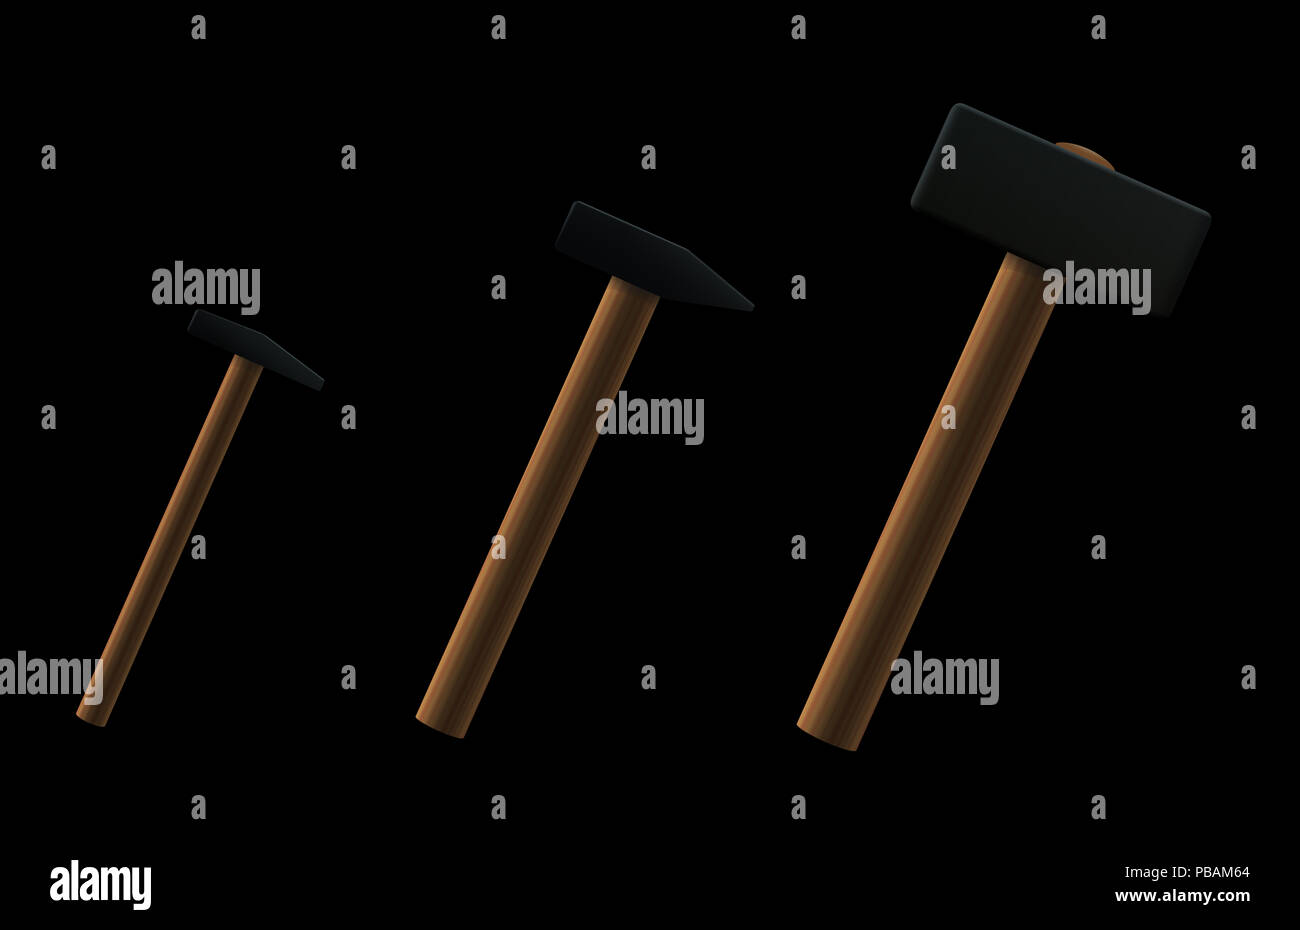 Small, normal and big hammer - illustration on black background. Stock Photo